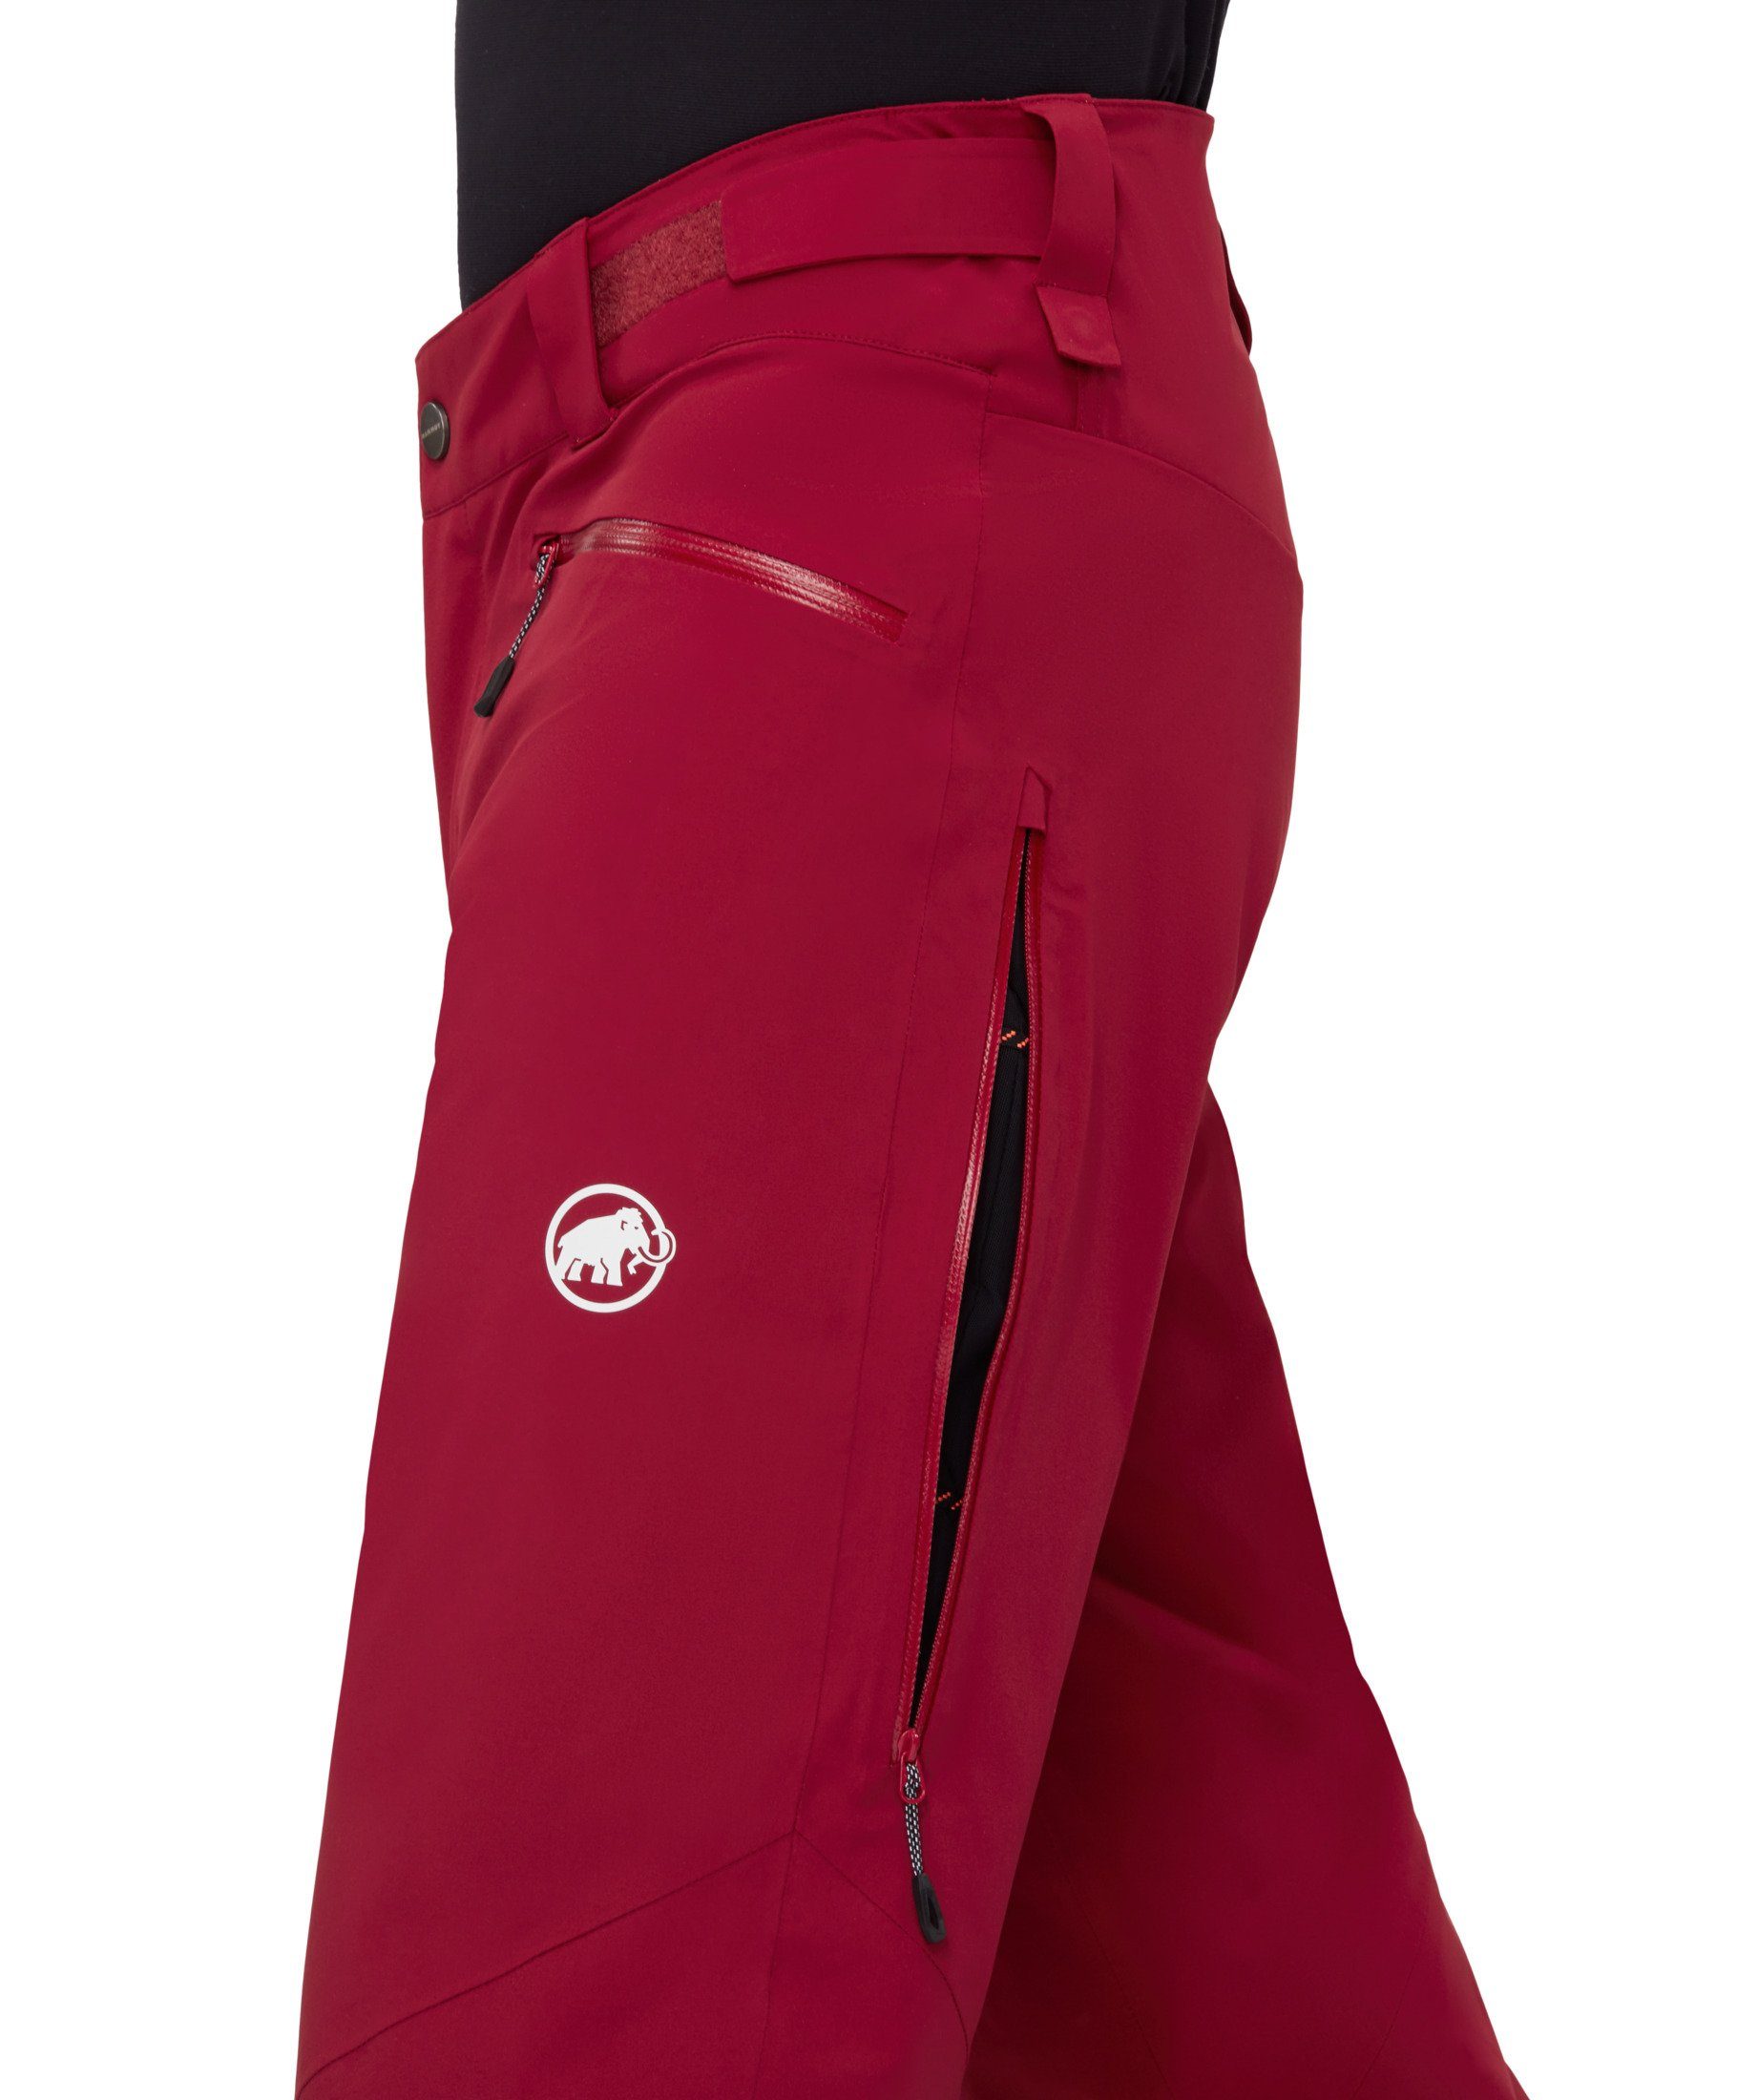 Mammut Skihose Stoney HS Thermo Men red Pants blood